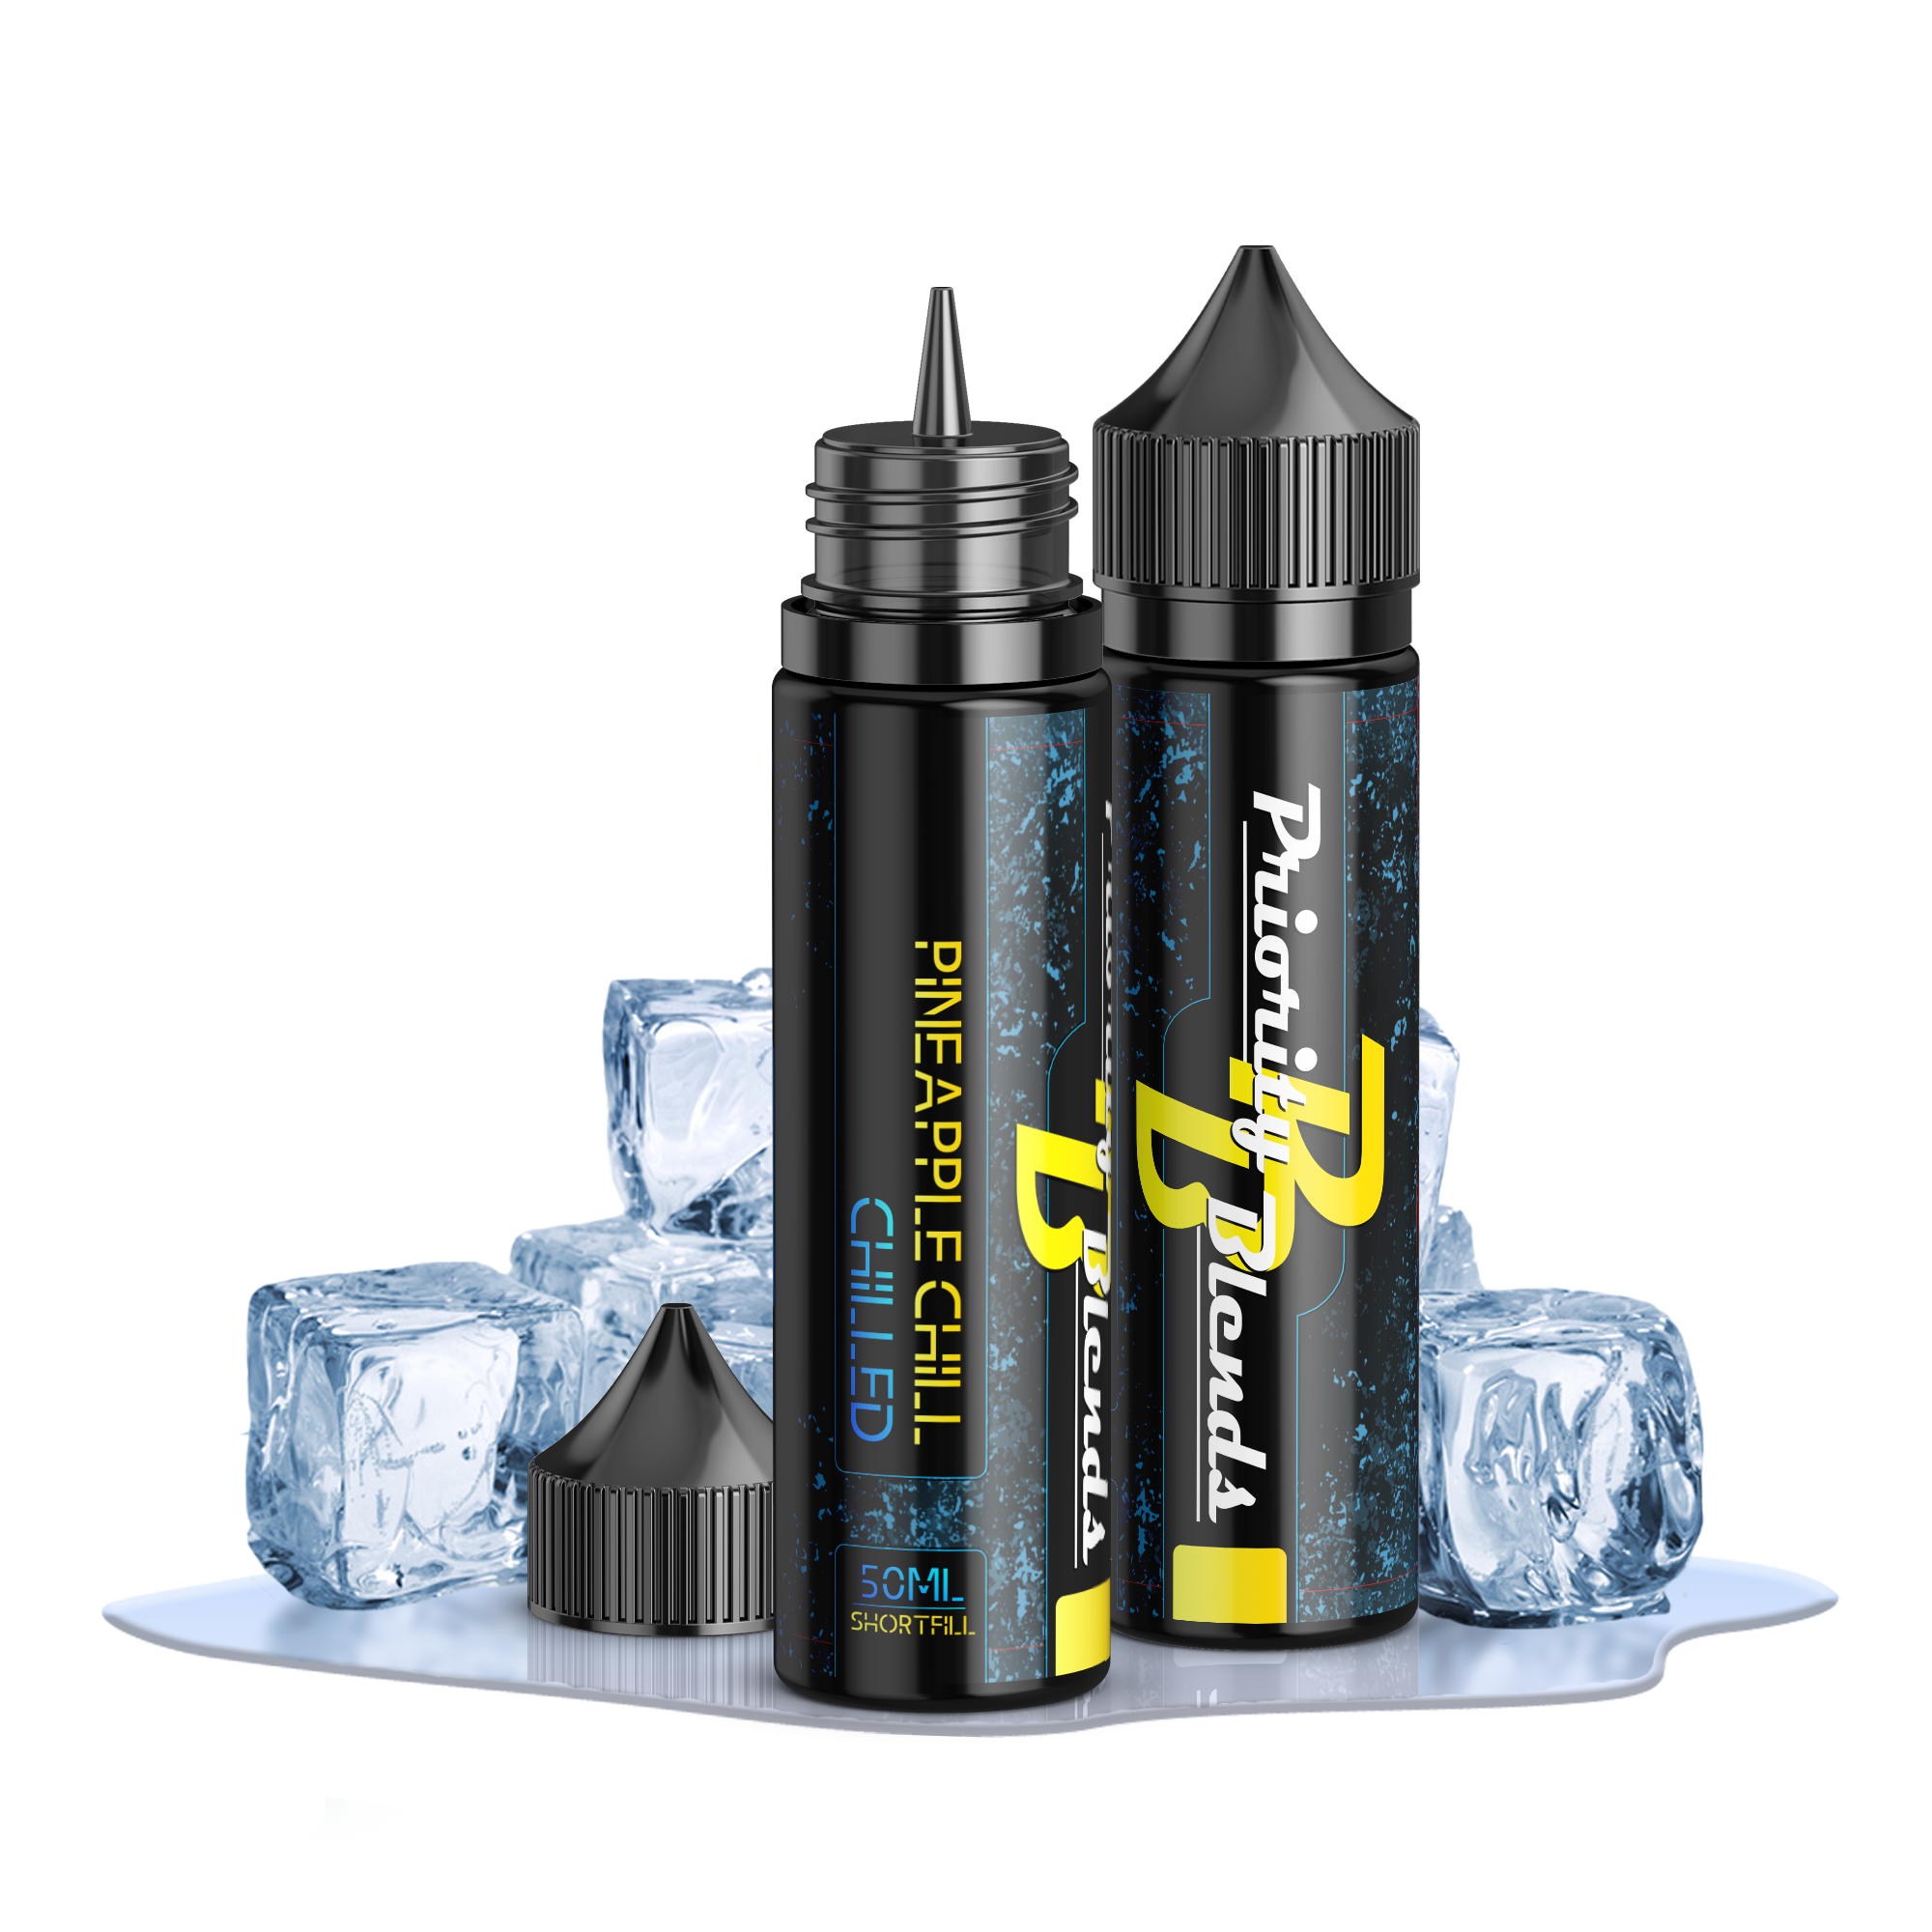 Buy Priority Blends Chilled - Pineapple Chill - Wick And Wire Co Melbourne Vape Shop, Victoria Australia